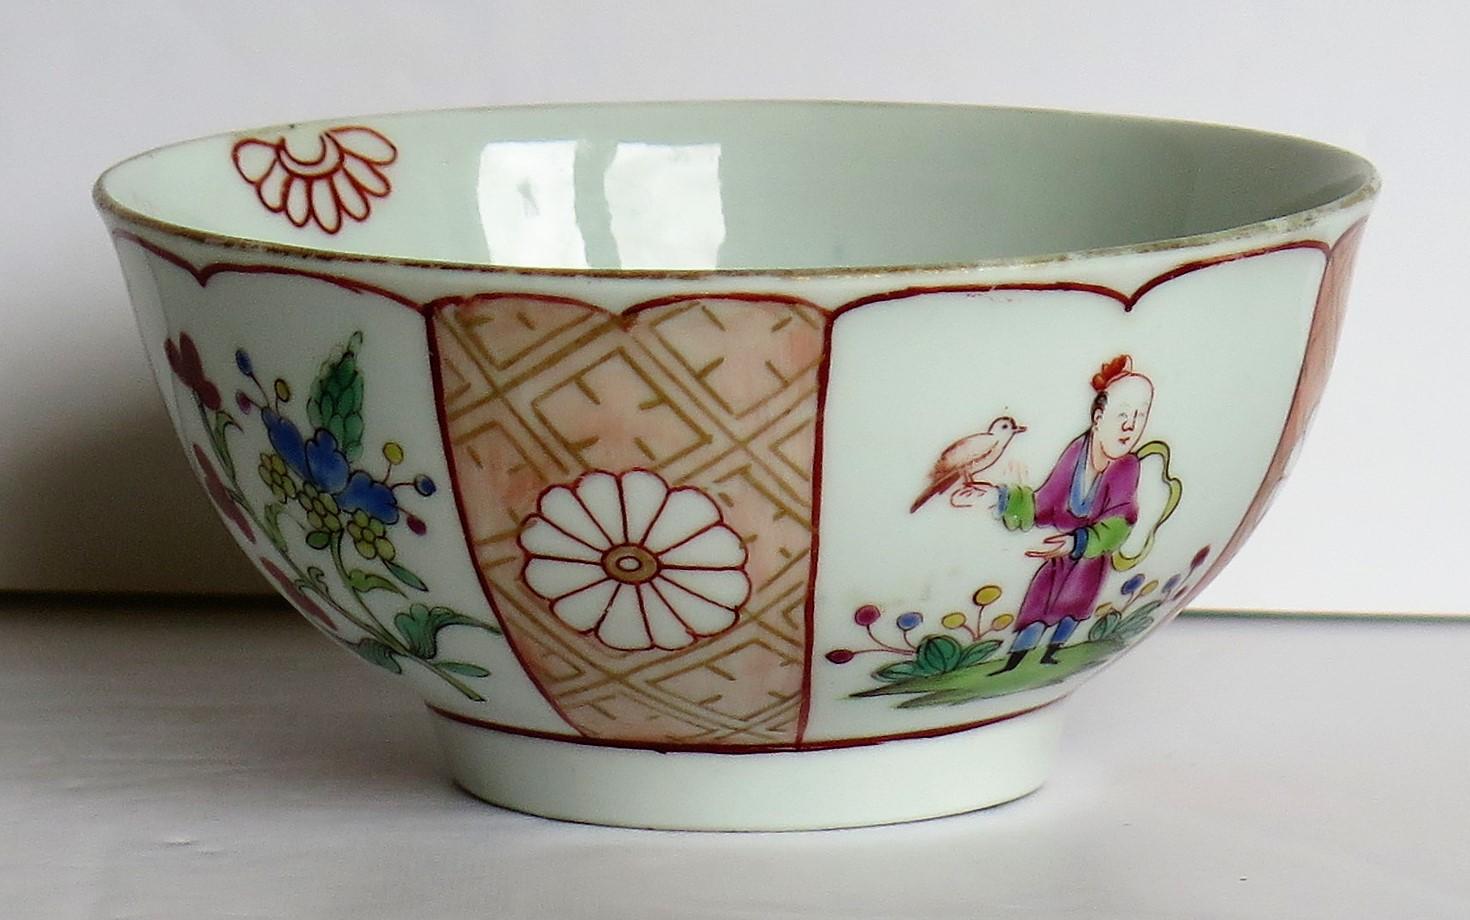 This is a rare first period (or Dr. Wall) Worcester bowl, with a Chinese figure pattern, made of porcelain and dating to the 18th century, circa 1770.

This delightful Worcester bowl, is finely hand painted in polychrome enamels in the Japanese